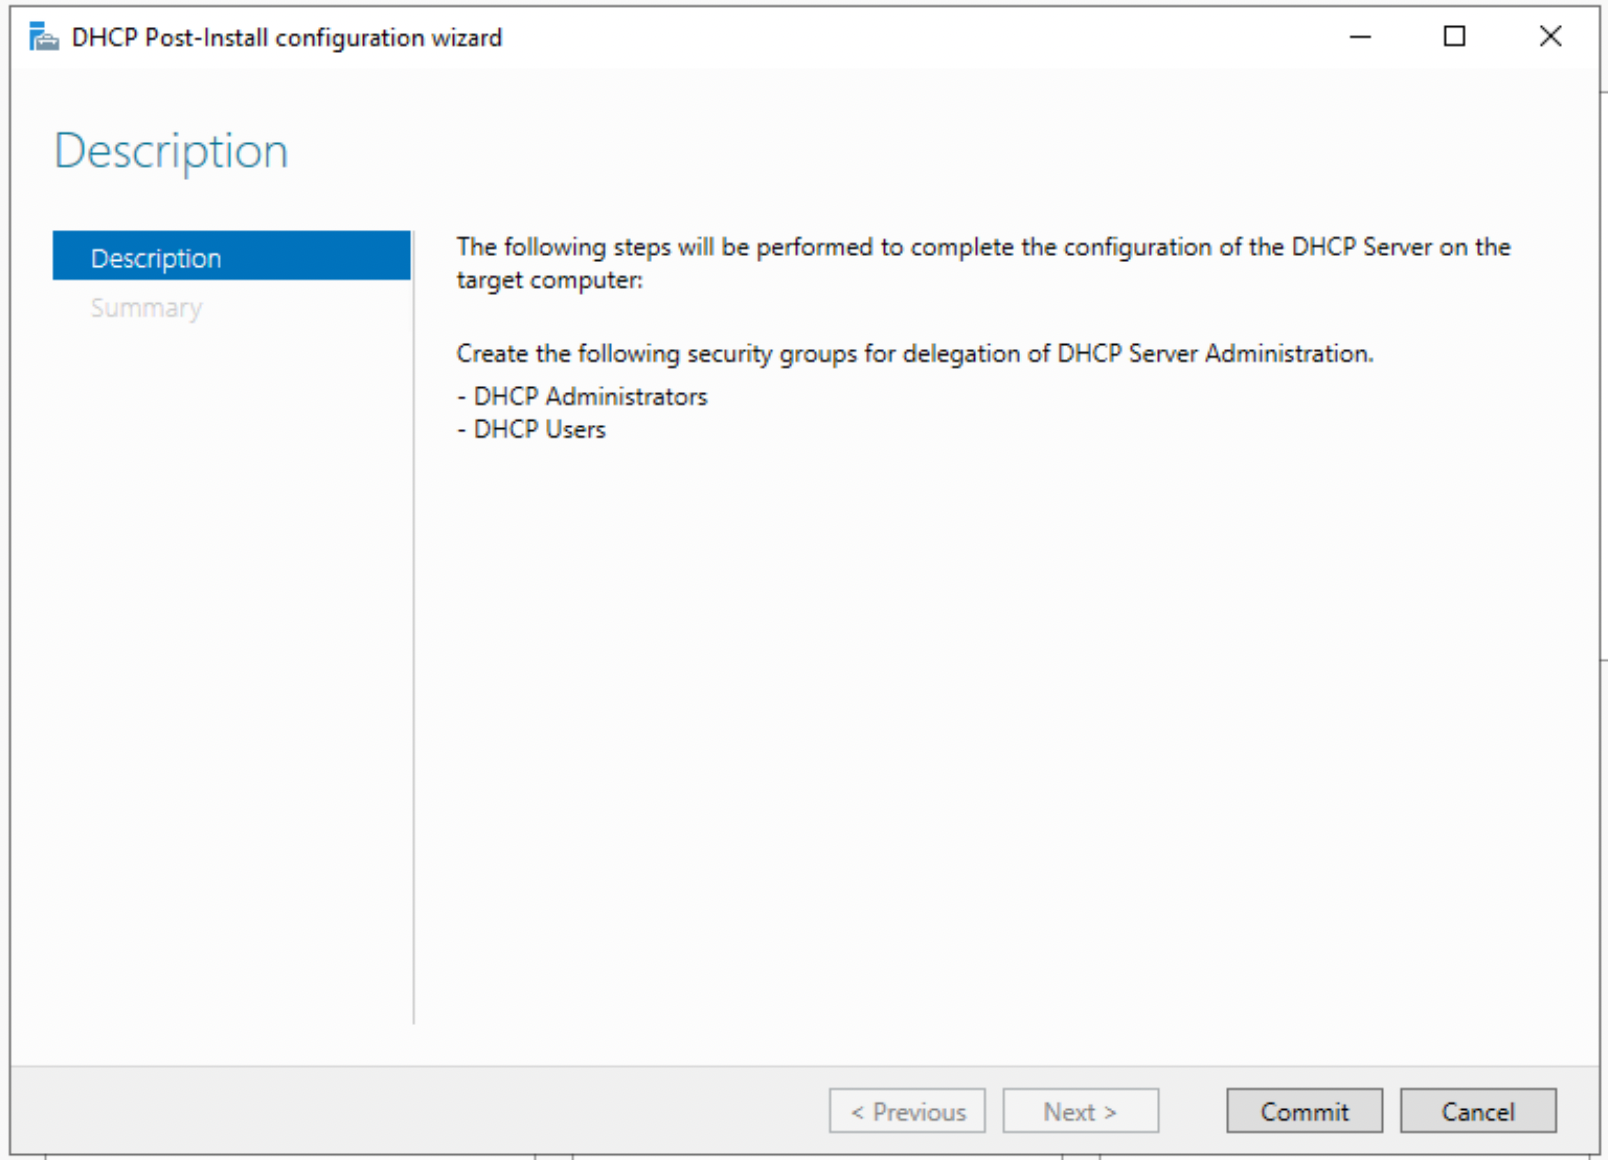 Configuration Wizard for the DHCP server role